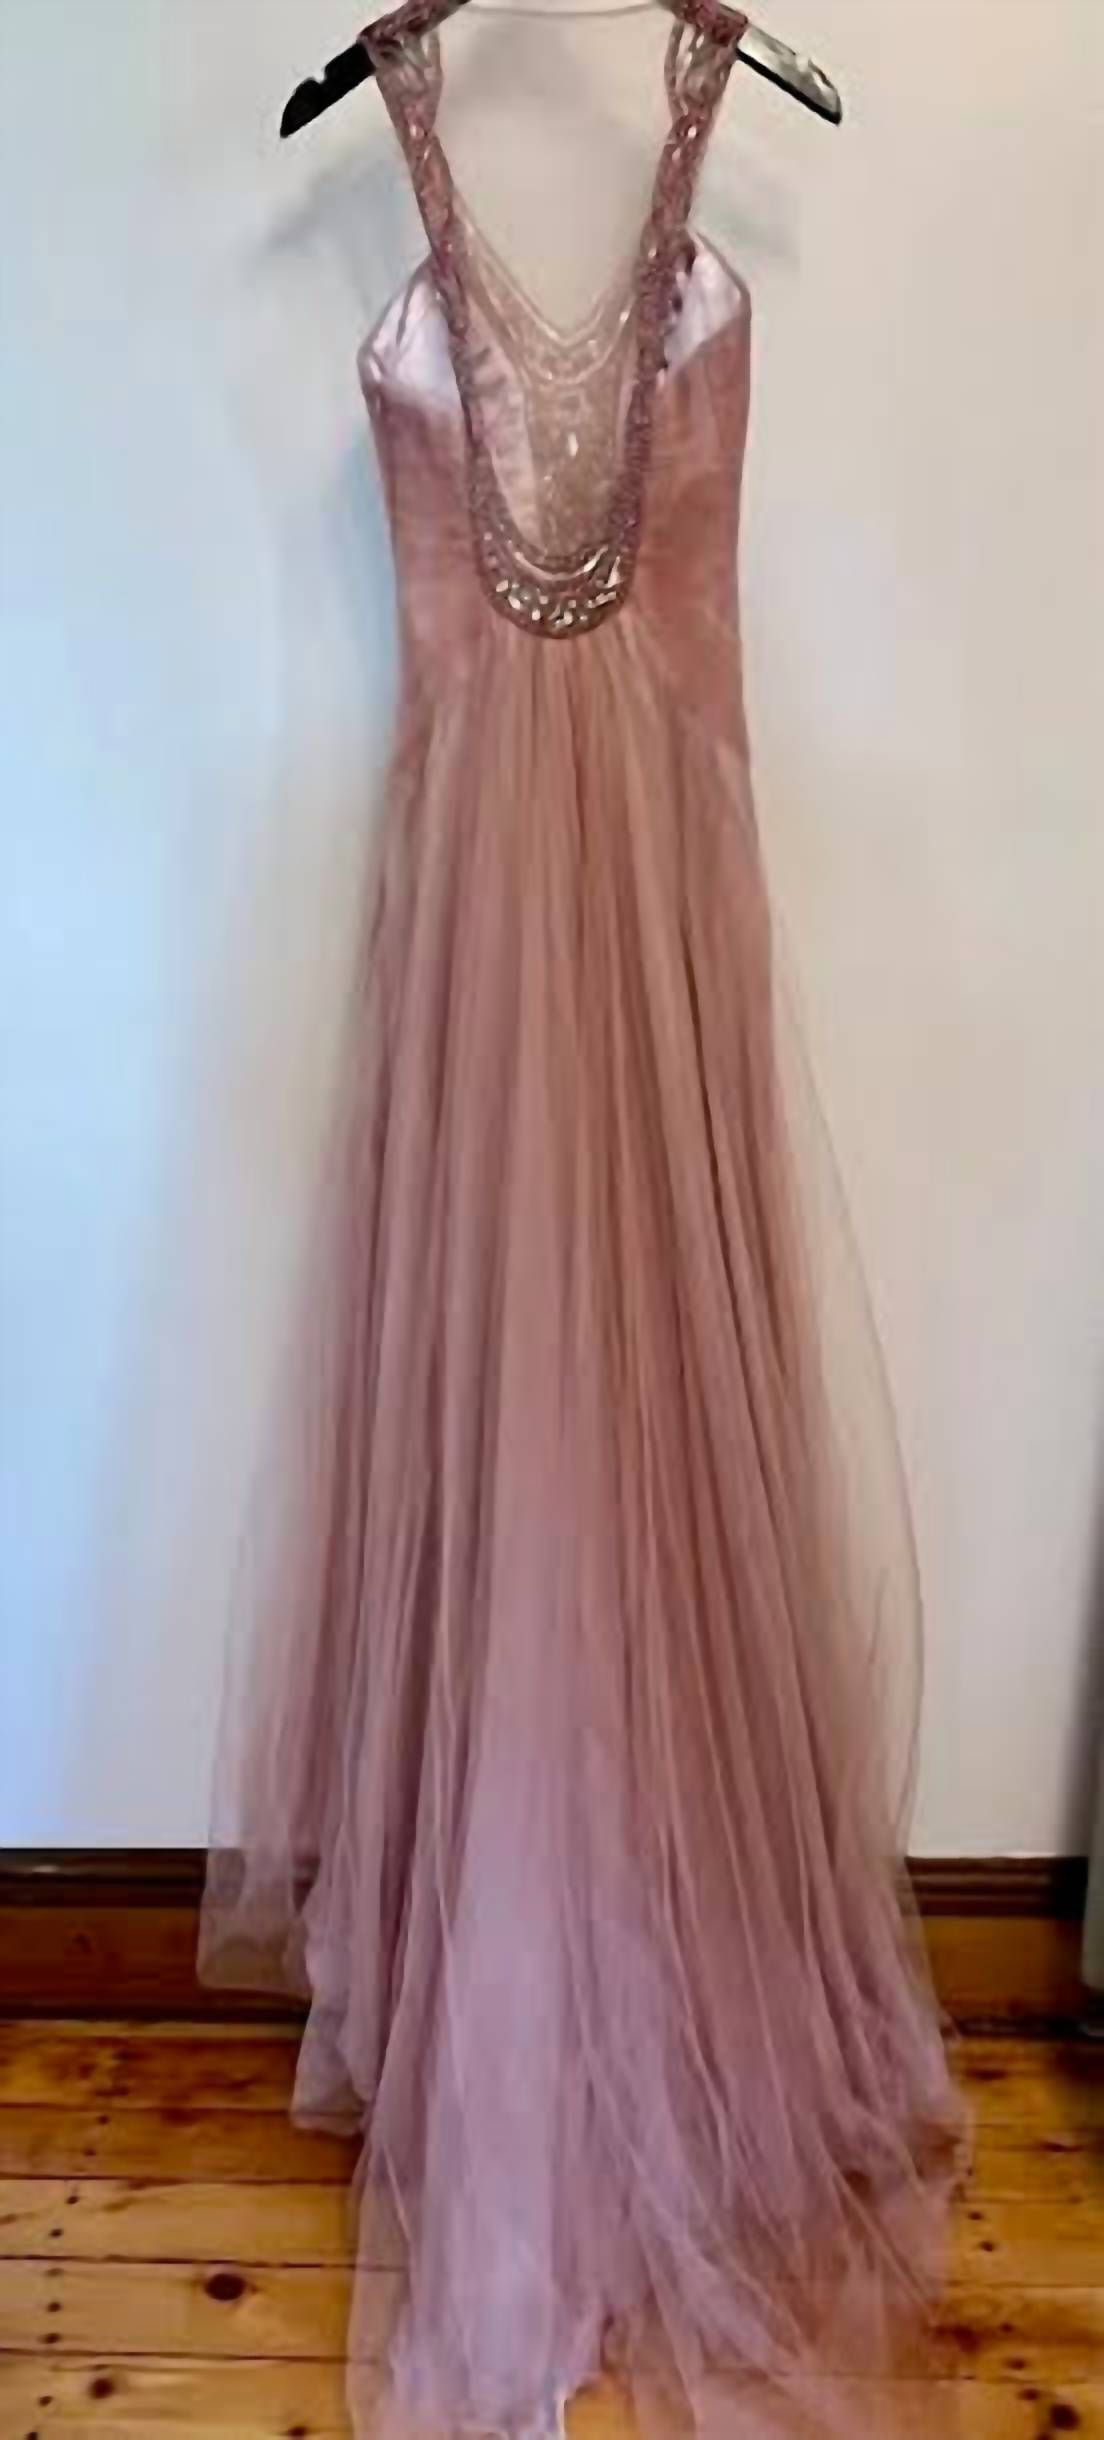 Style 1-2559304215-649 ALBERTO MAKALI Size 2 Sheer Pink A-line Dress on Queenly